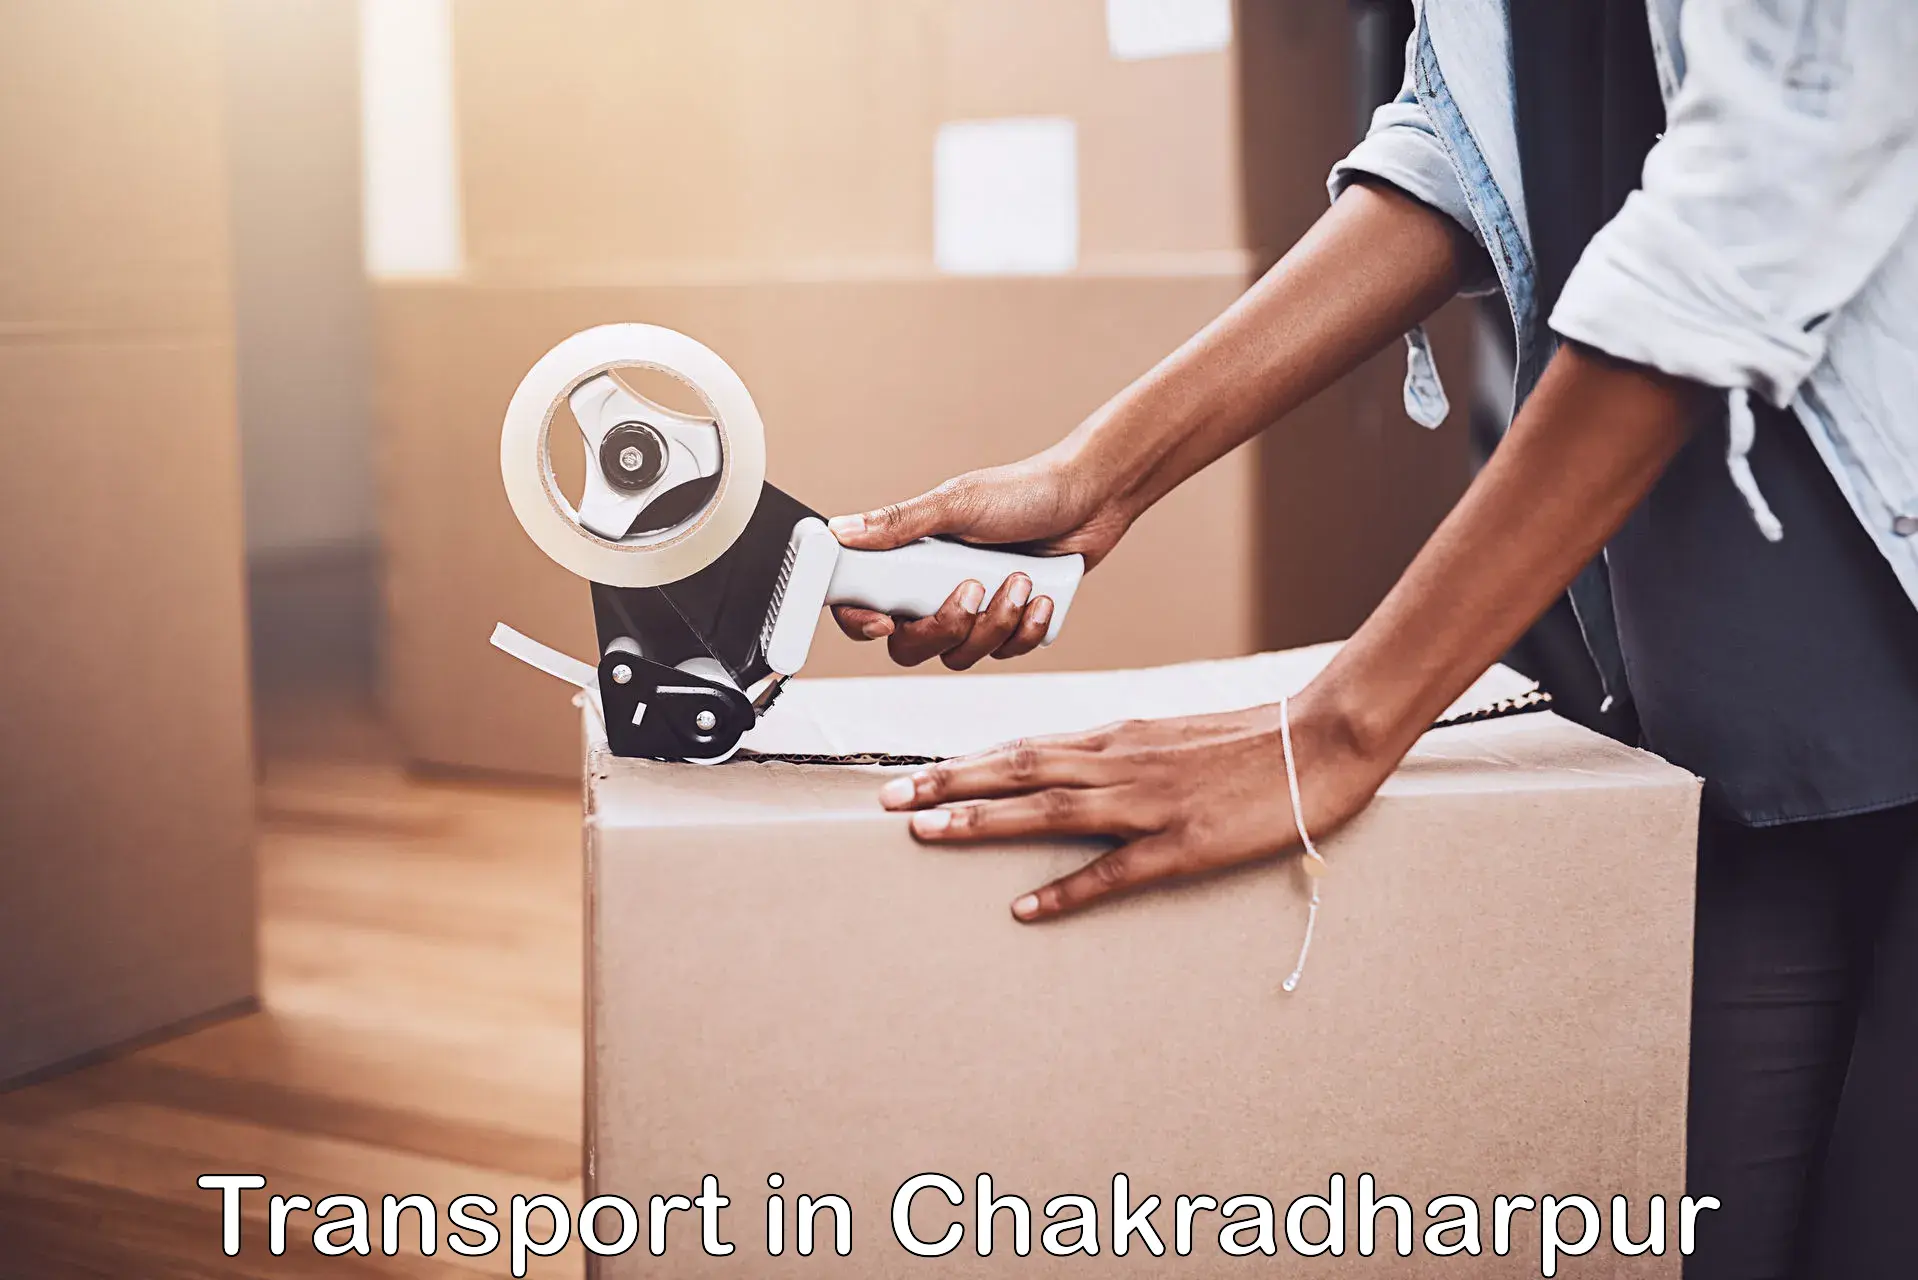 Express transport services in Chakradharpur